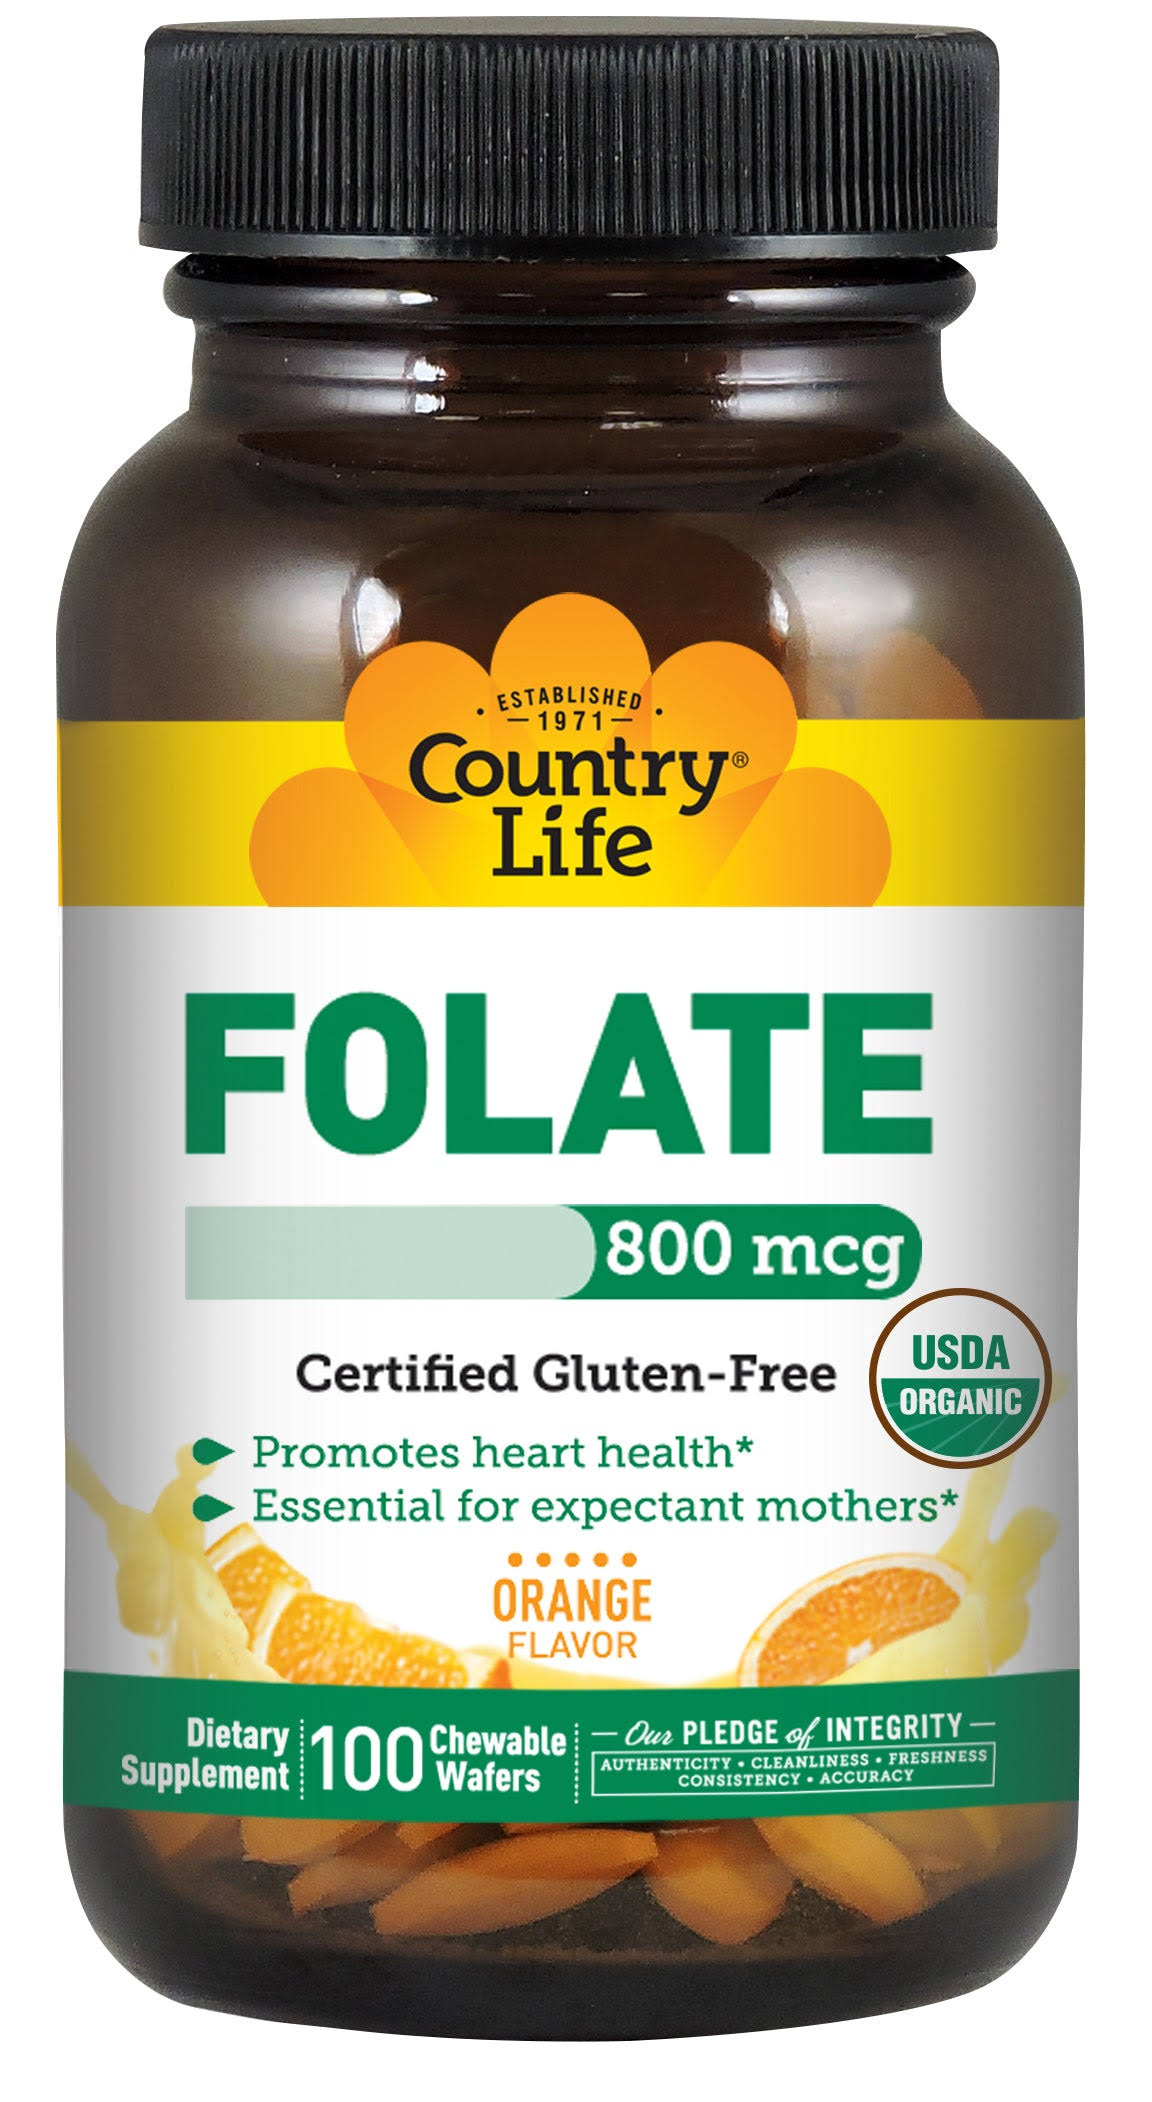 Country Life Folate Supplement - USDA Organic, 100 Chewable Wafers